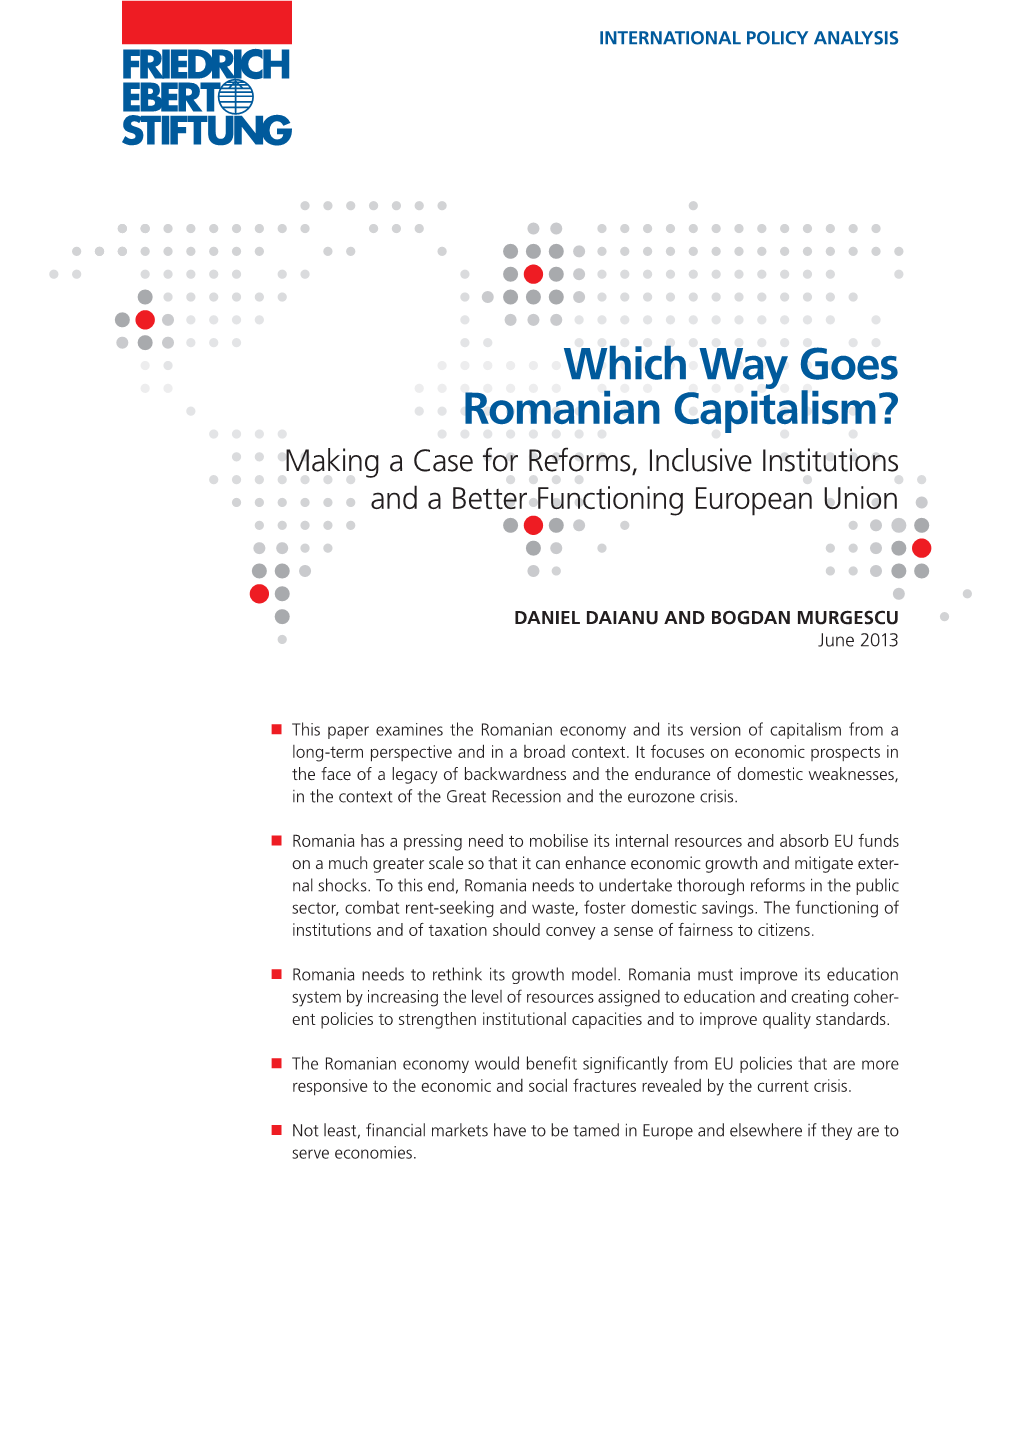 Which Way Goes Romanian Capitalism? Making a Case for Reforms, Inclusive Institutions and a Better Functioning European Union